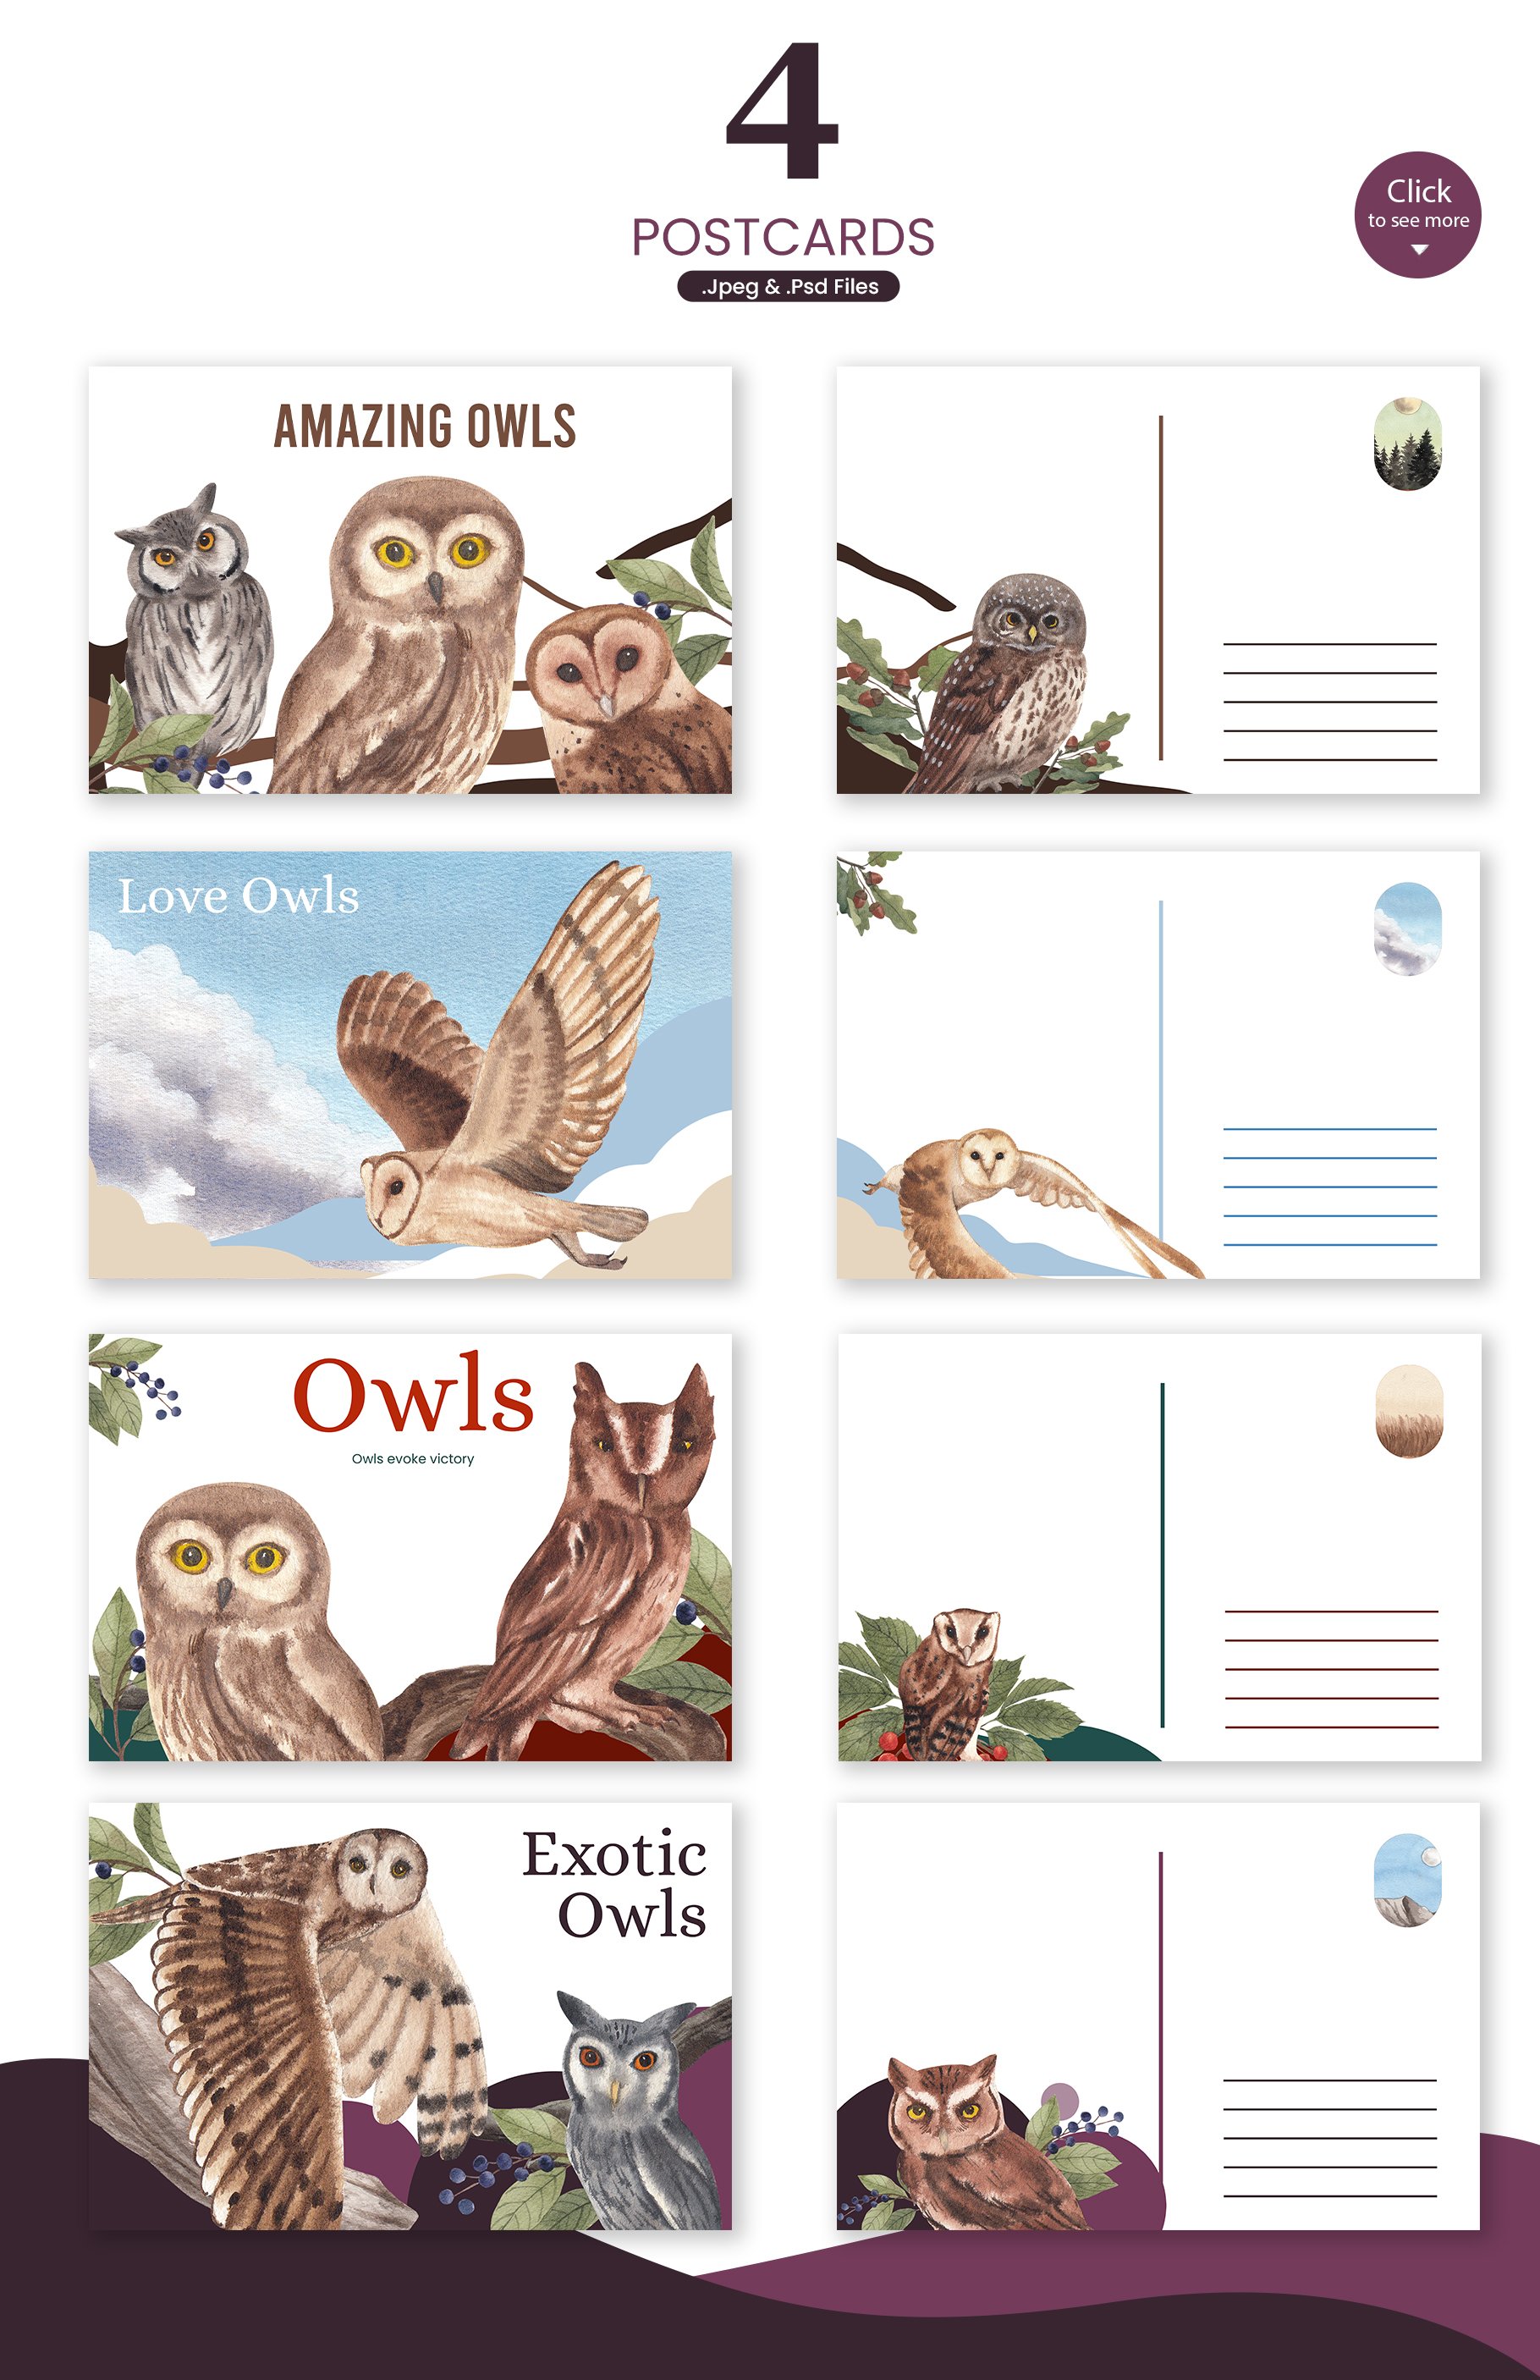 Owls in jungle postcards for you.